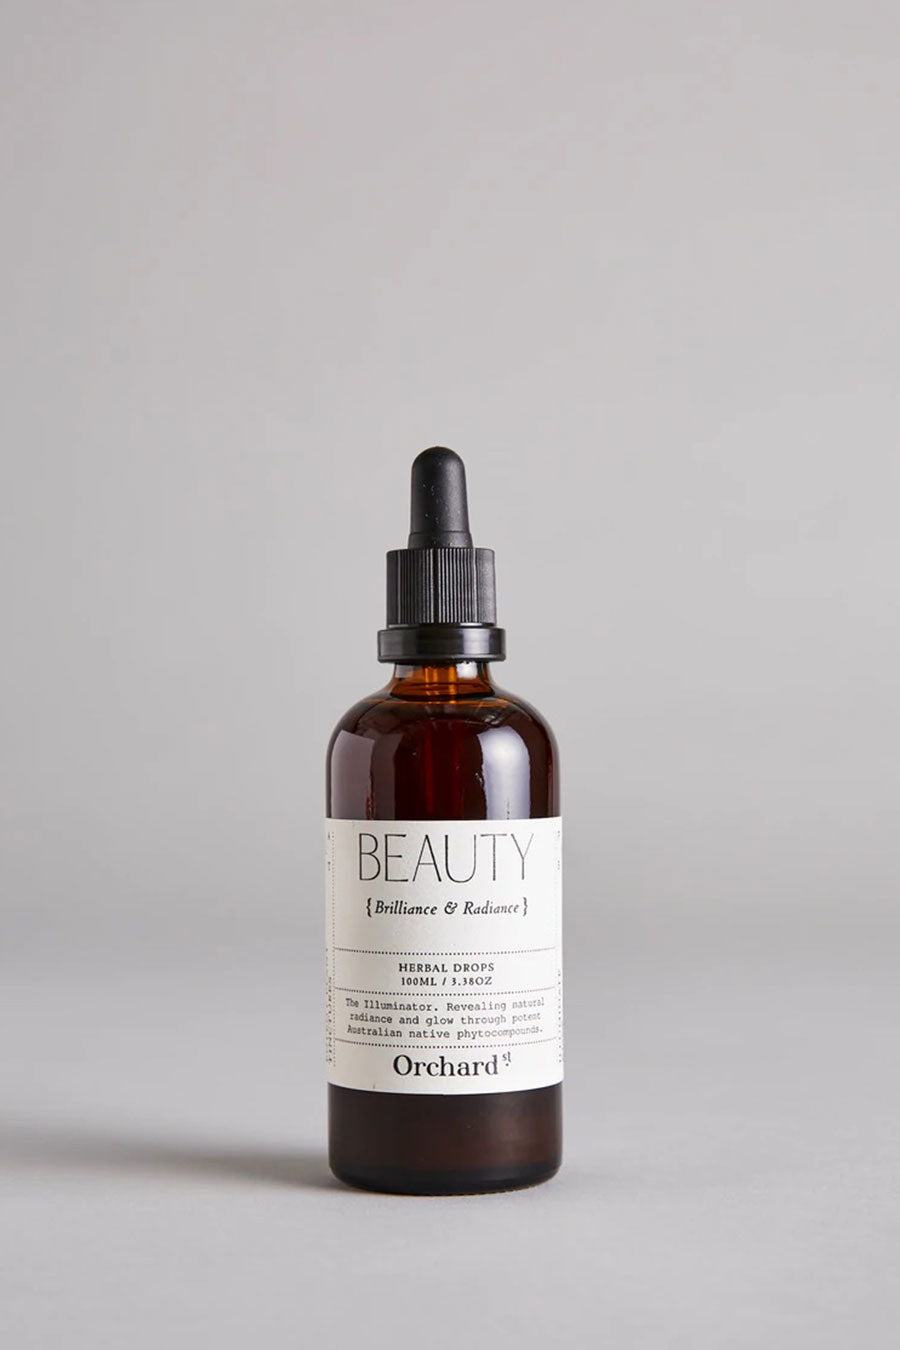 Orchard St Herbal Drops - Beauty